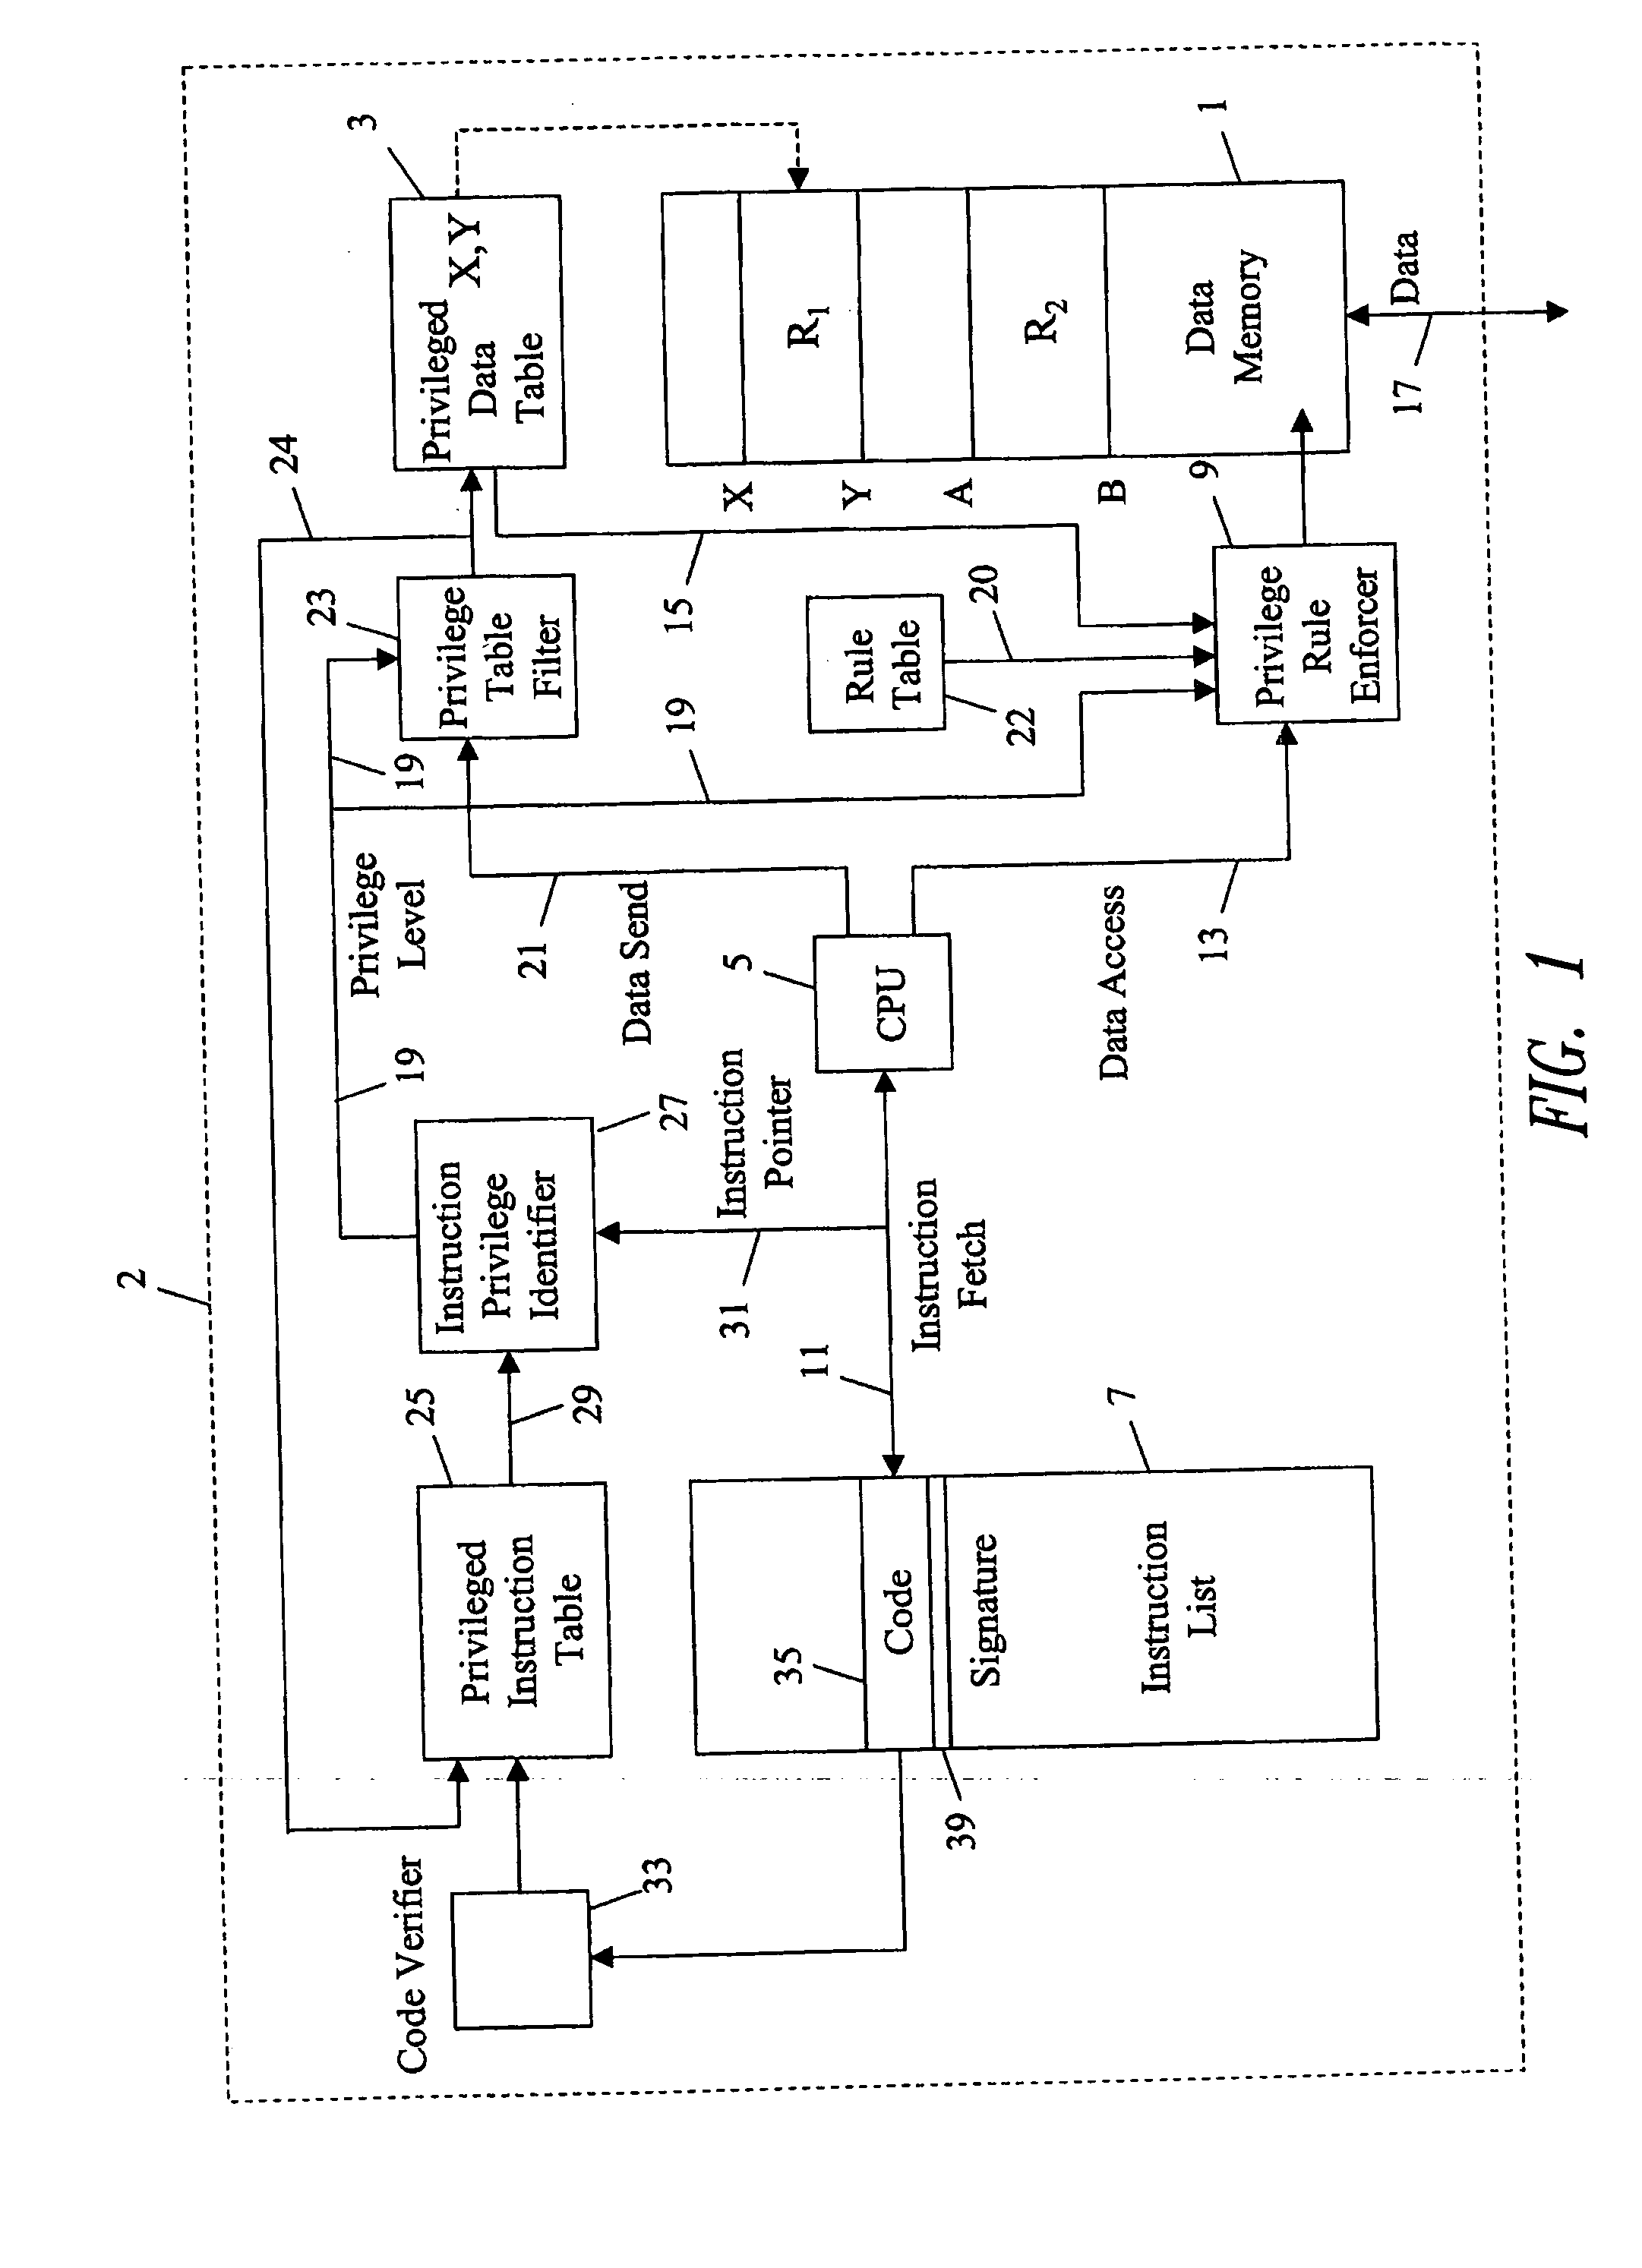 Circuit for restricting data access